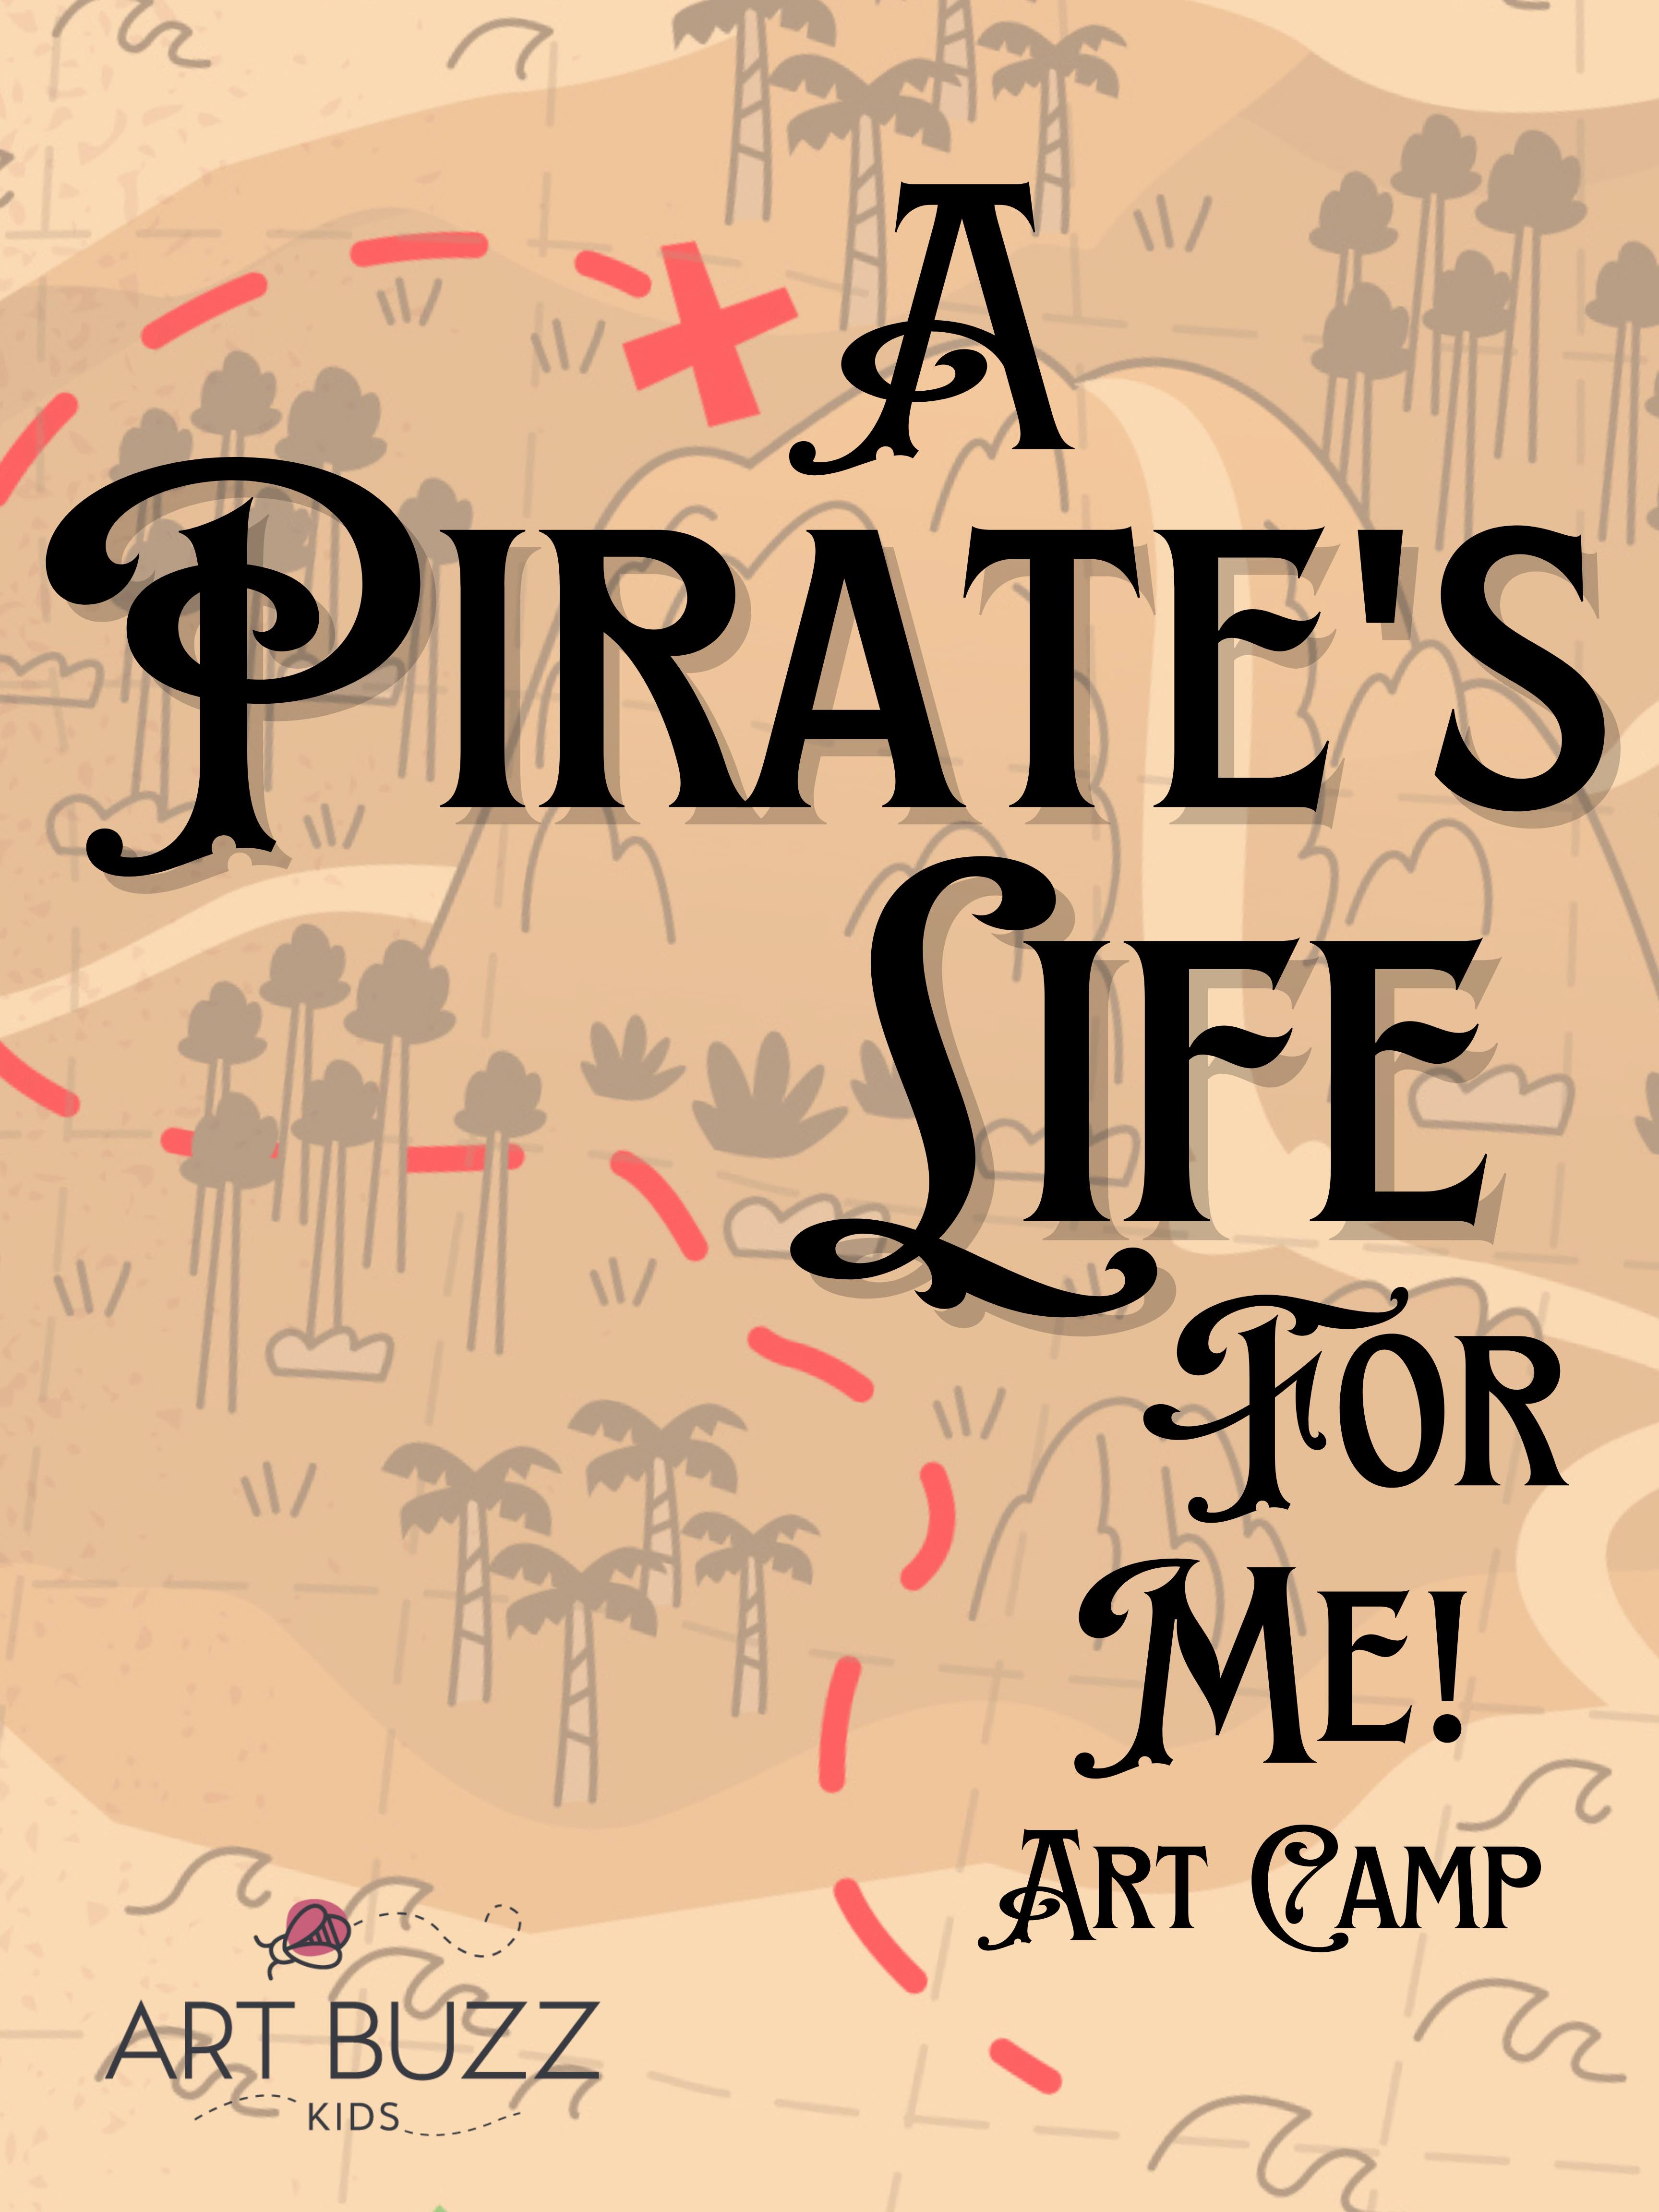 (FULL DAY) Monday-Friday KIDS ART CAMP: A Pirate's Life for Me!